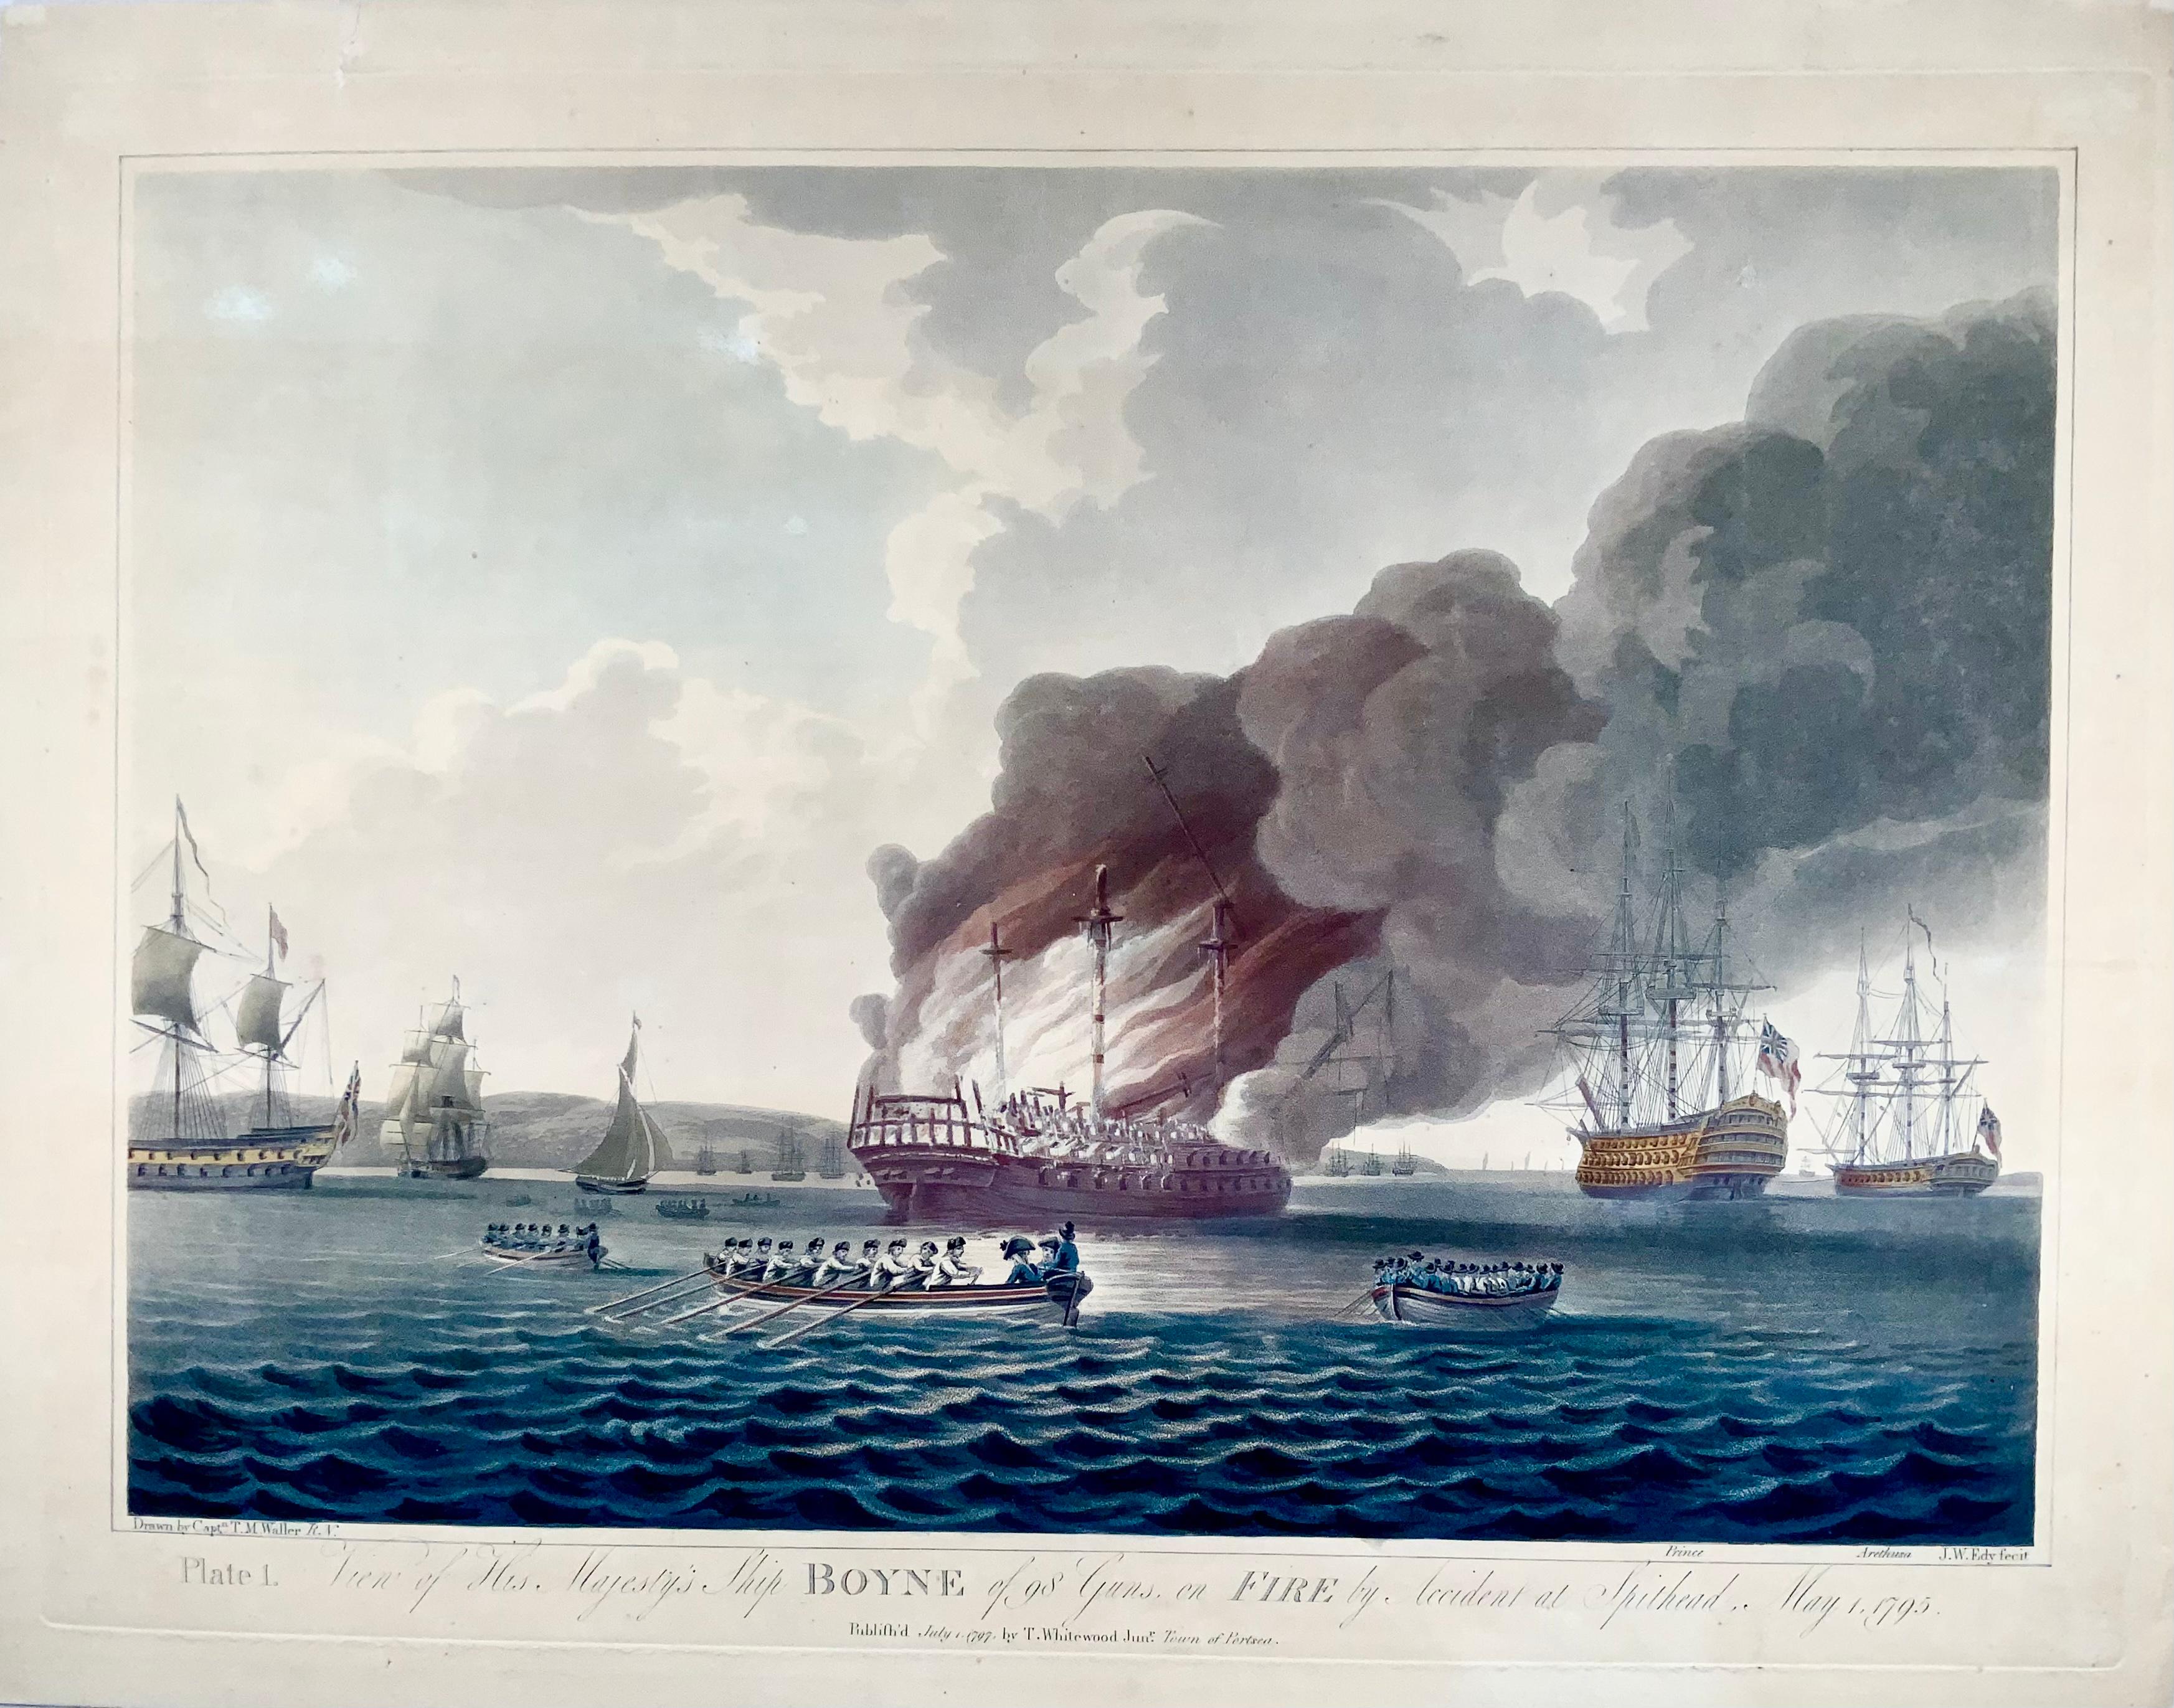 On offer two superb and large aquatints (with original hand color) depicting the “Explosion on, and Sinking of Her Majesty’s Ship BOYNE”

Plate 1. “View of His Majesty's Ship Boyne of 98 Guns (Vice-Admiral Sir John Jervis's flagship, in action in